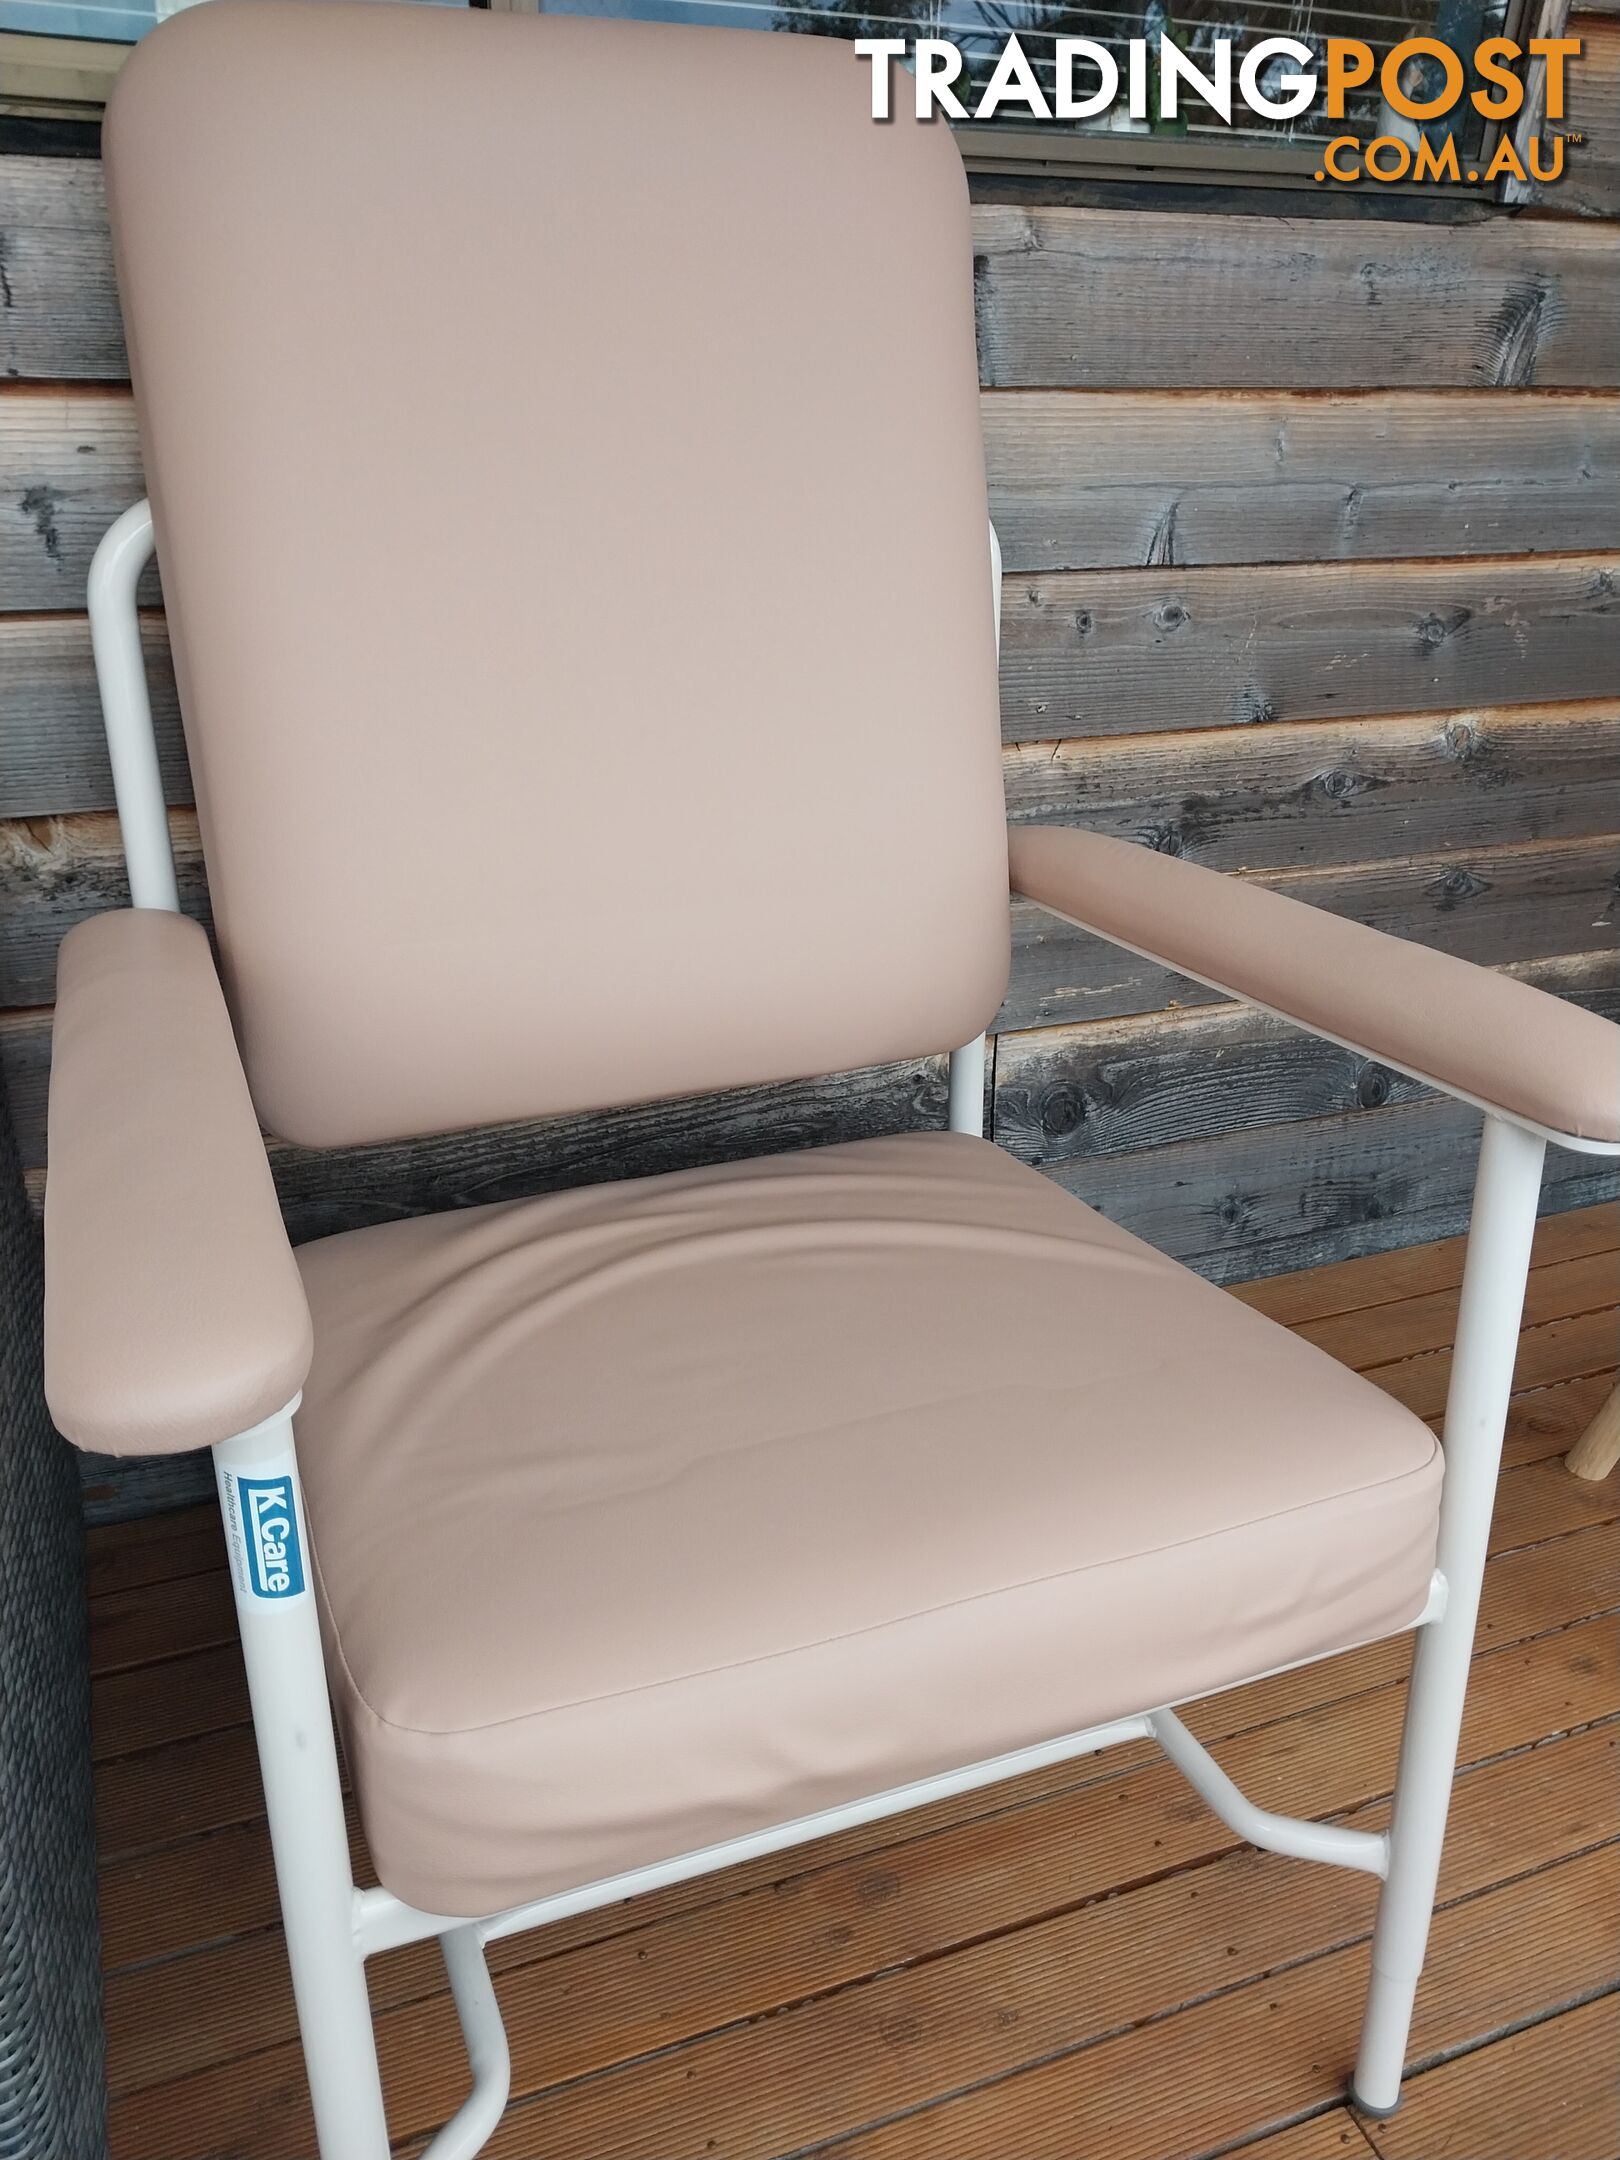 2 Xtra Large High Back Medical Aid Chairs